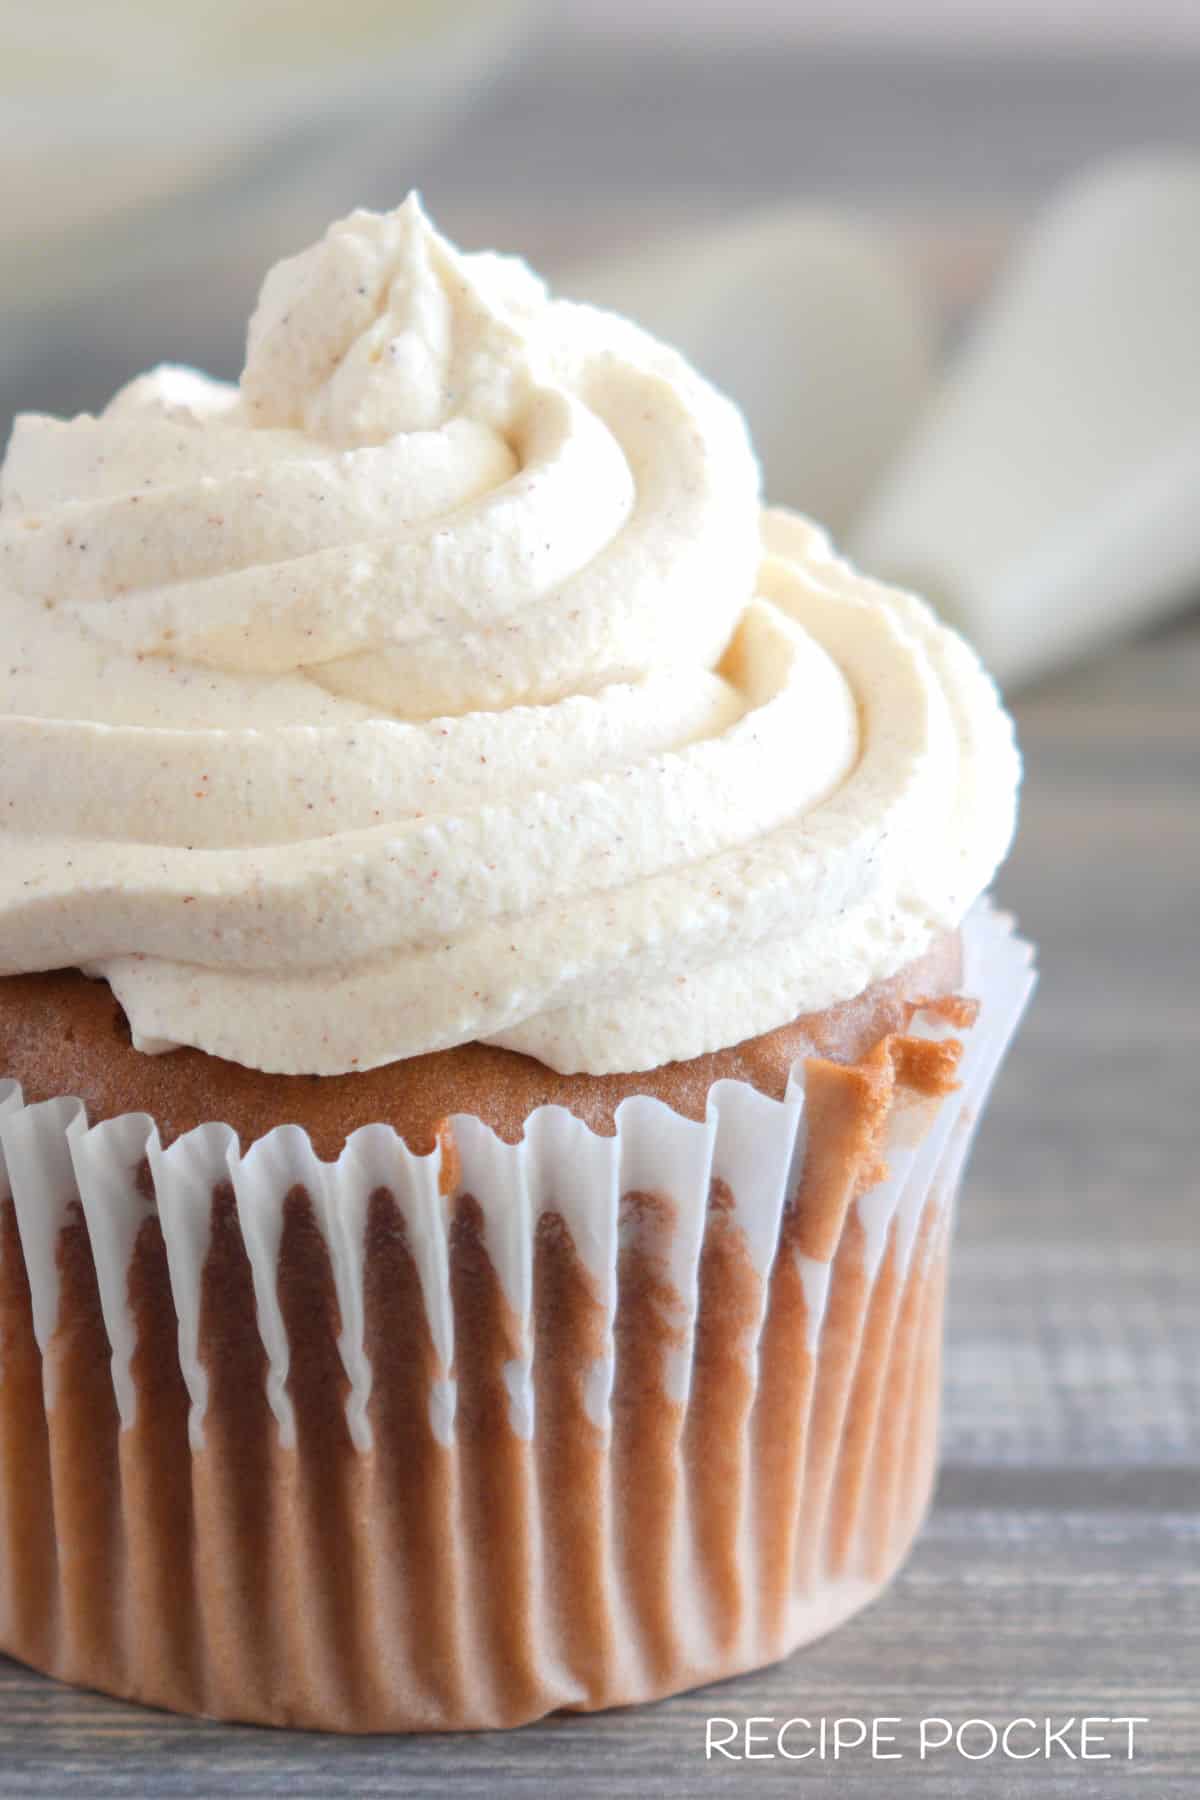 A close up view of cinnamon whipped cream on a cupcake.